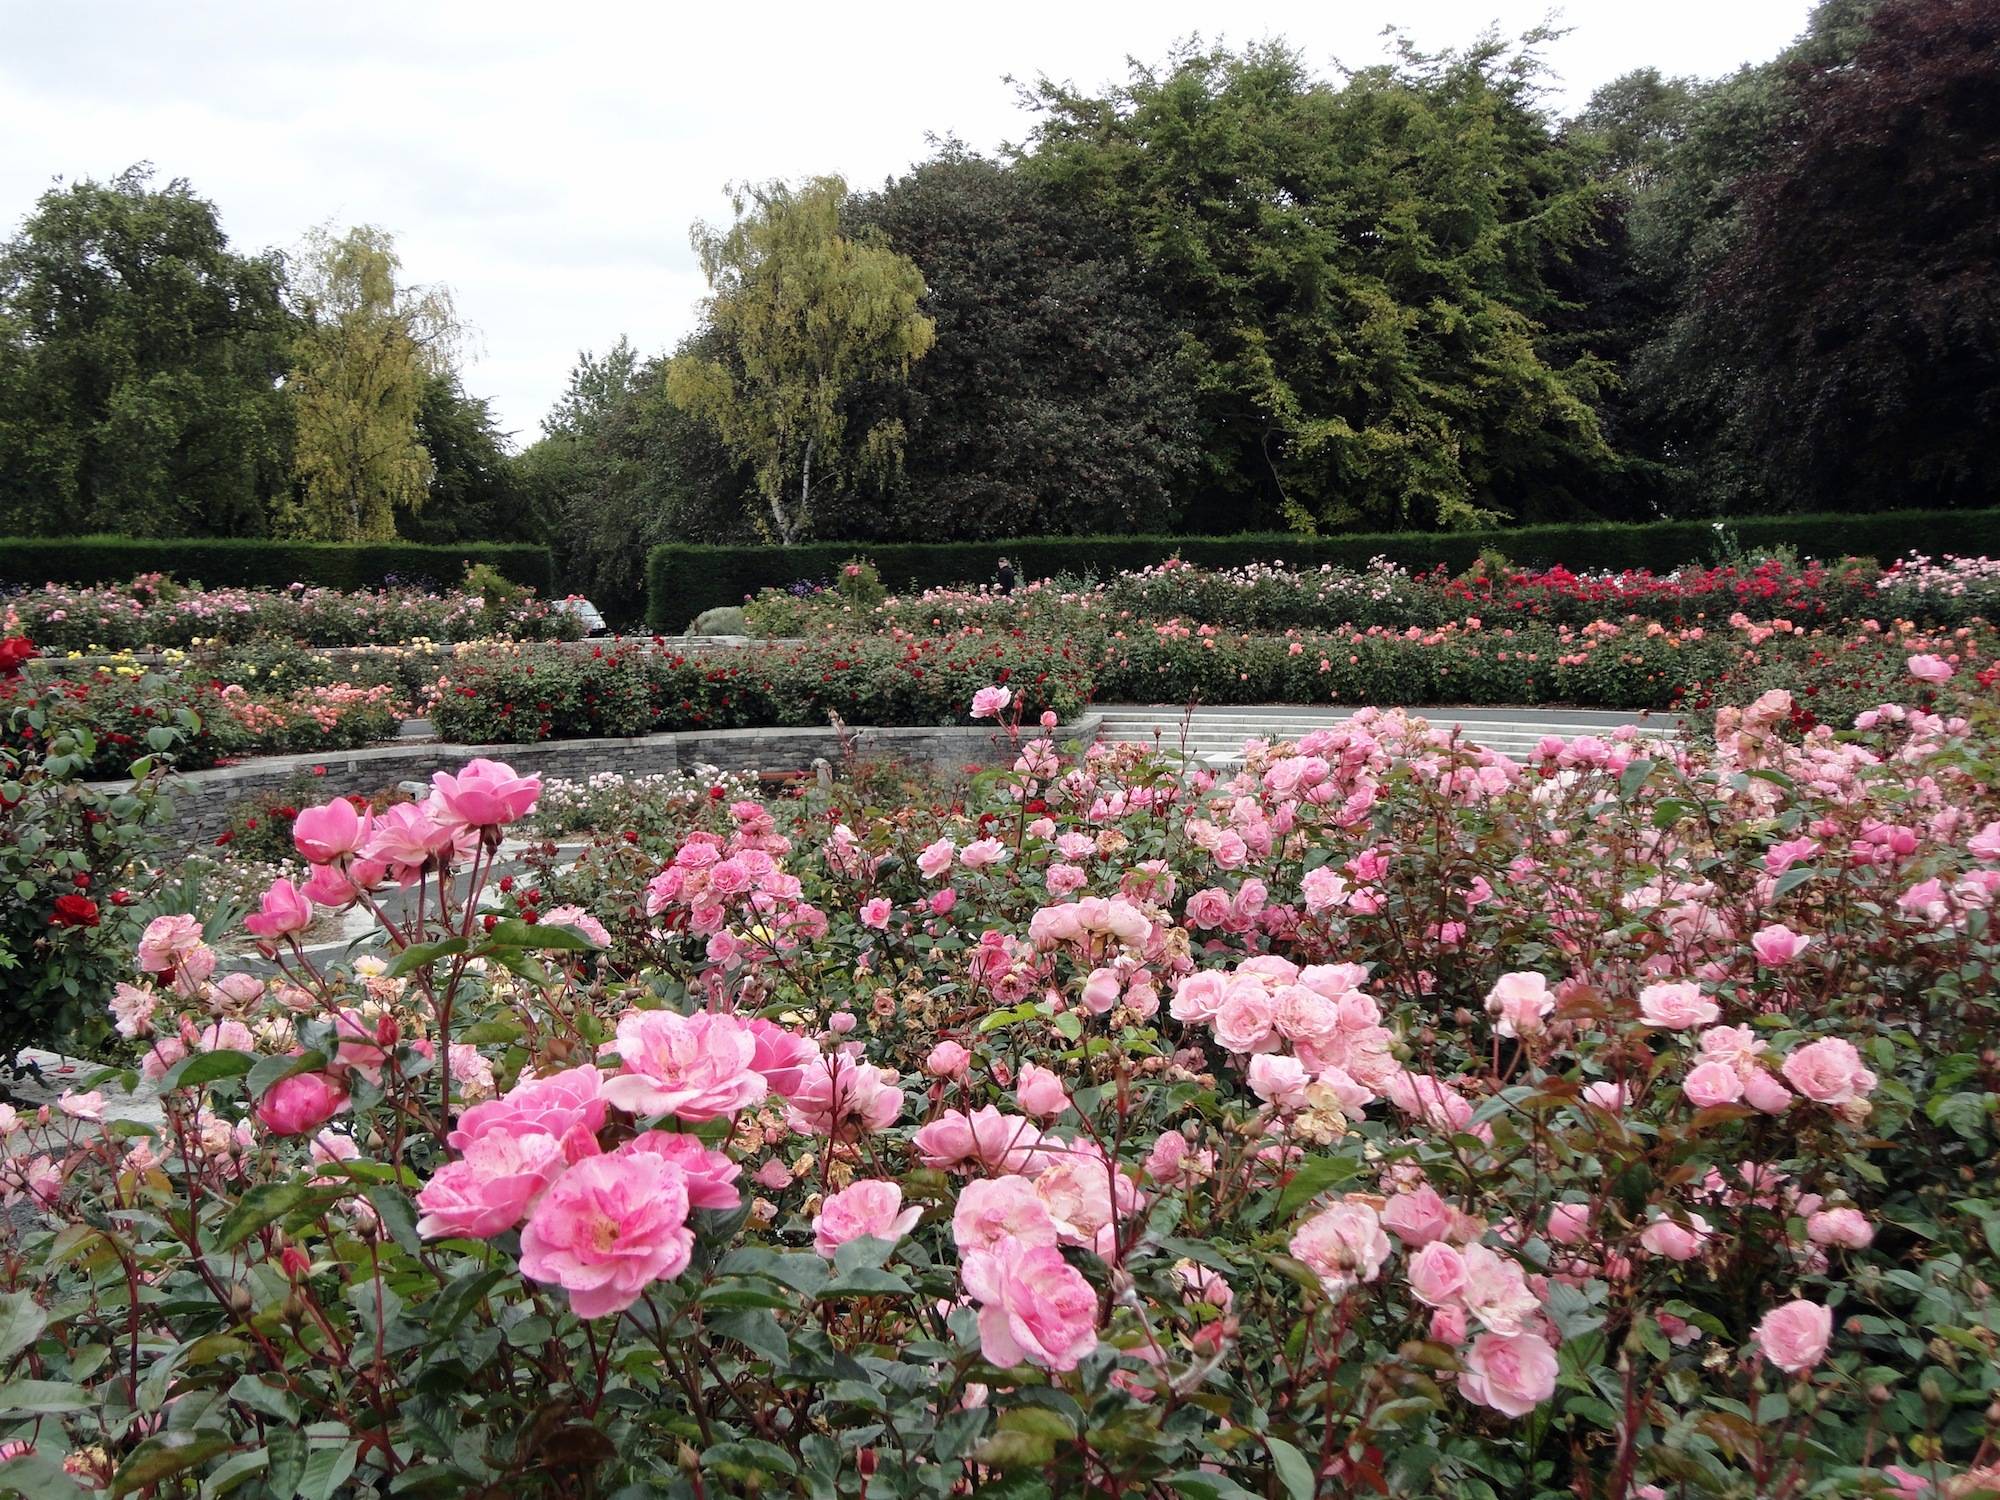 The sunken rose garden at the Irish National War Memorial Gardens, with Rosa Nathalie Nypels seen here. OPW.